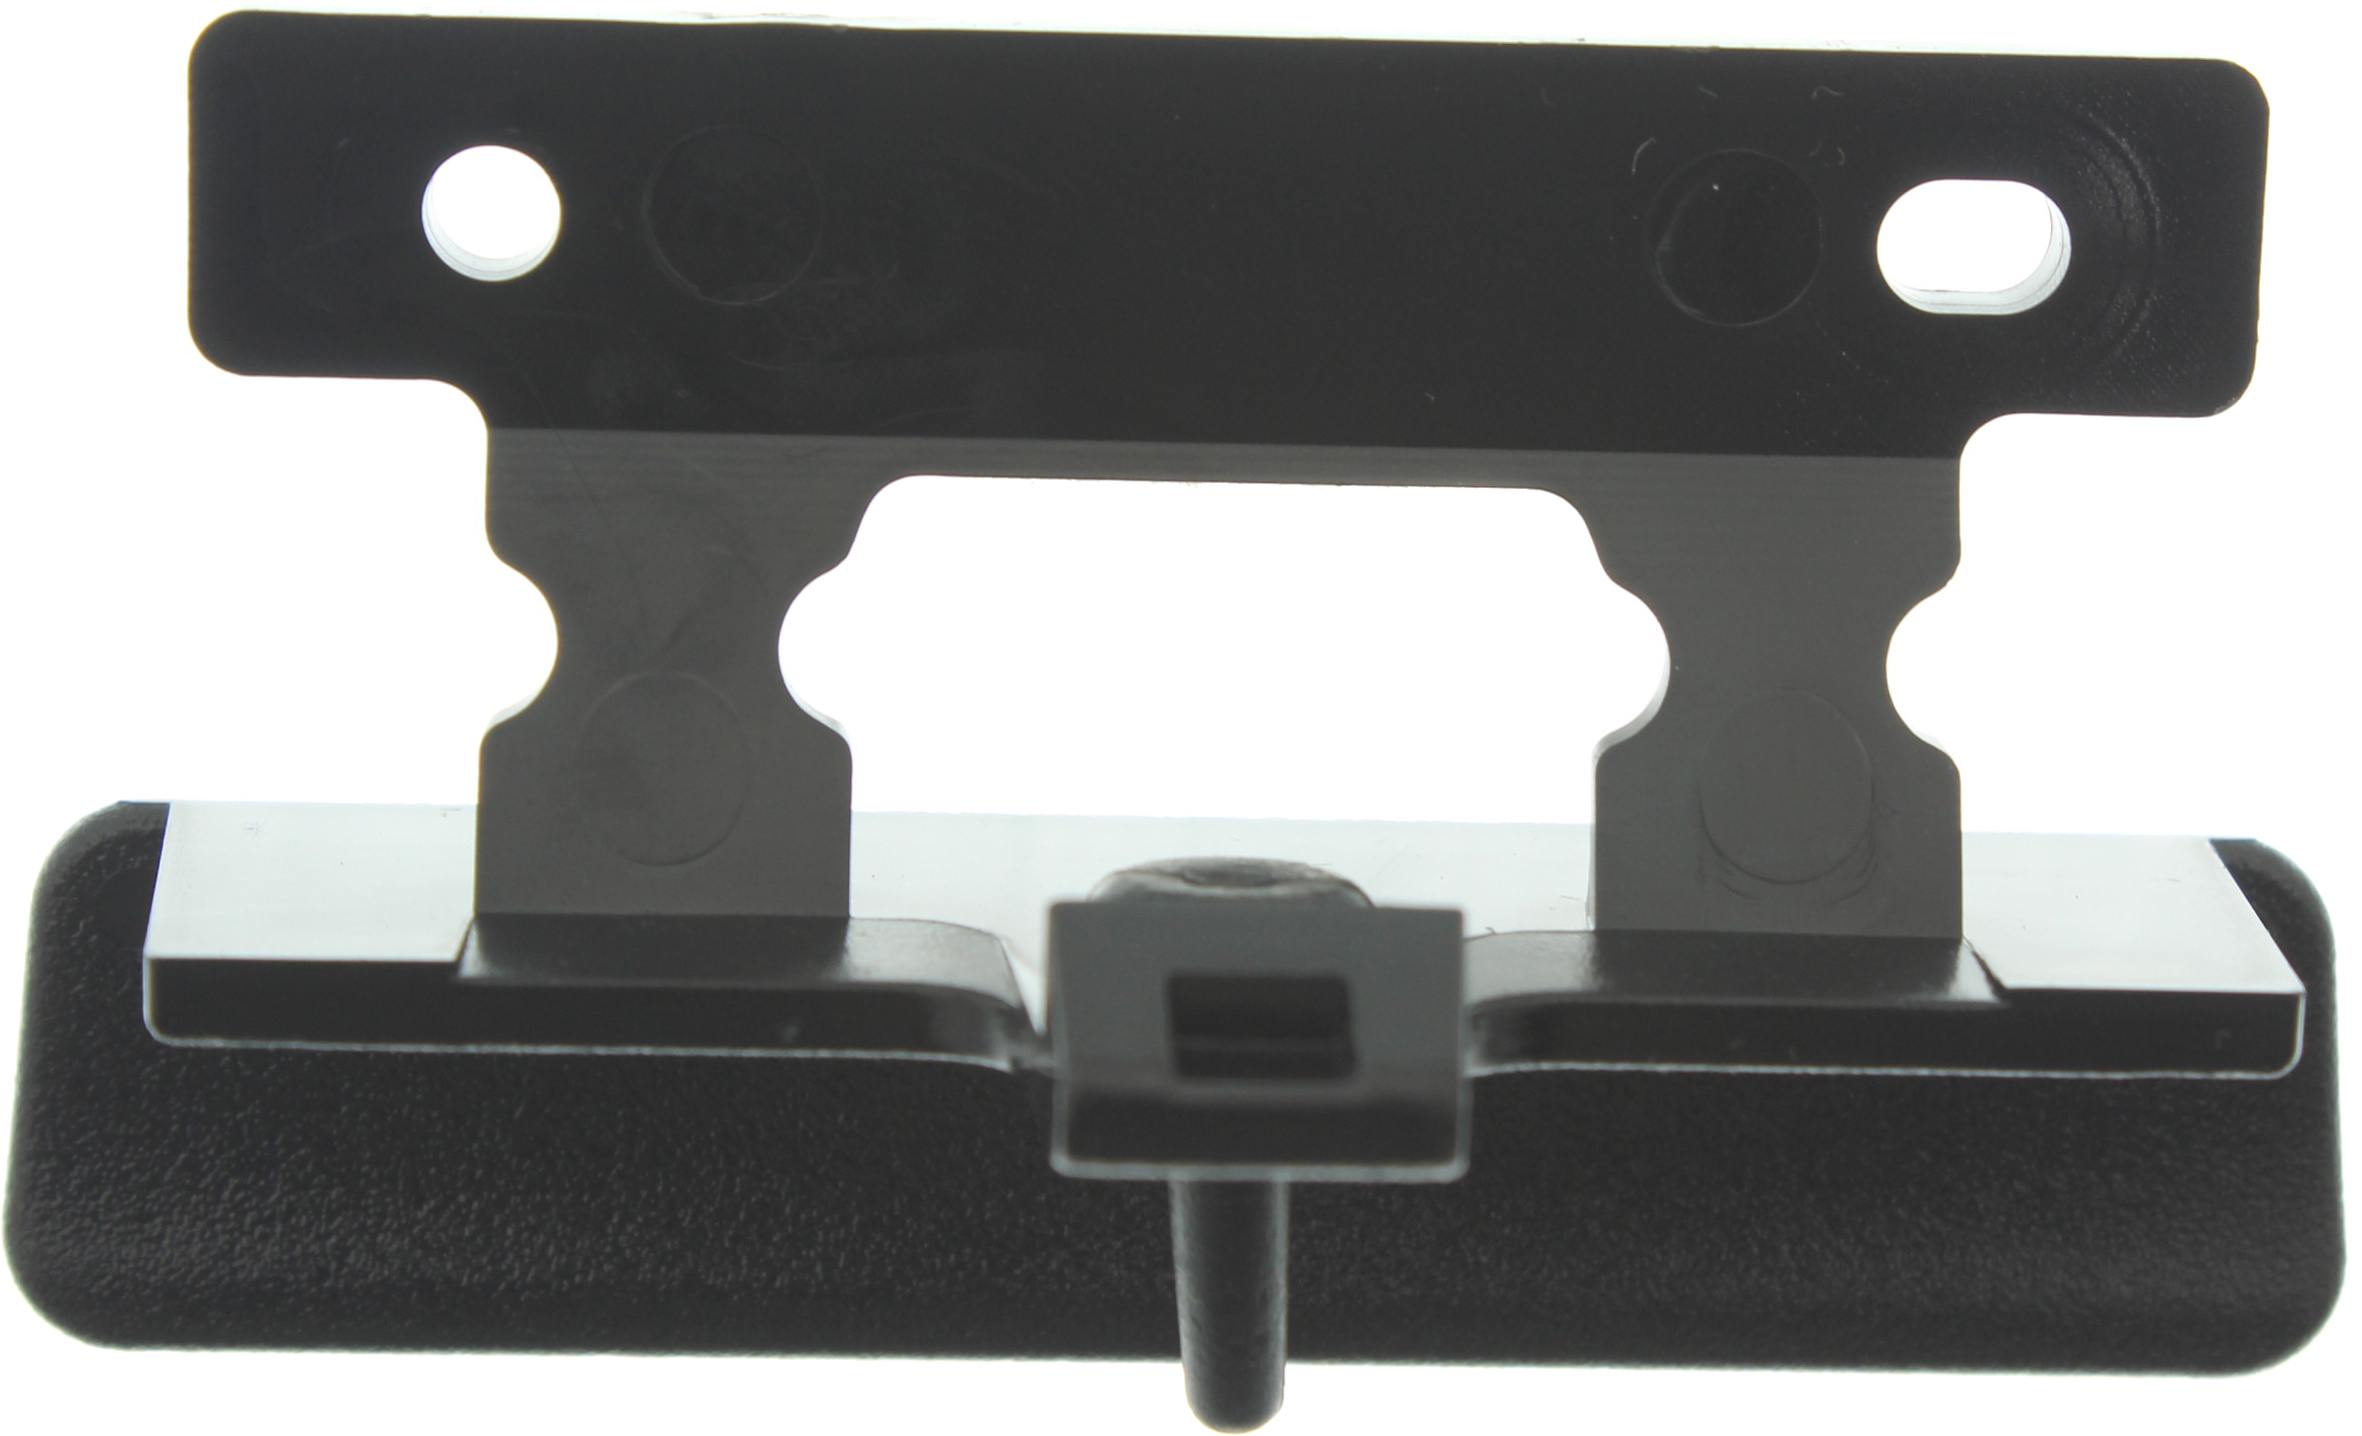 Console Latch Compatible For 2009-2013 Chevrolet Silverado 1500 2008-2013 Chevrolet Silverado 1500 2007-2013 Chevrolet Silverado 1500 2010-2013 Chevrolet Silverado 1500 2007-2014 Chevrolet Silver - image 1 of 3